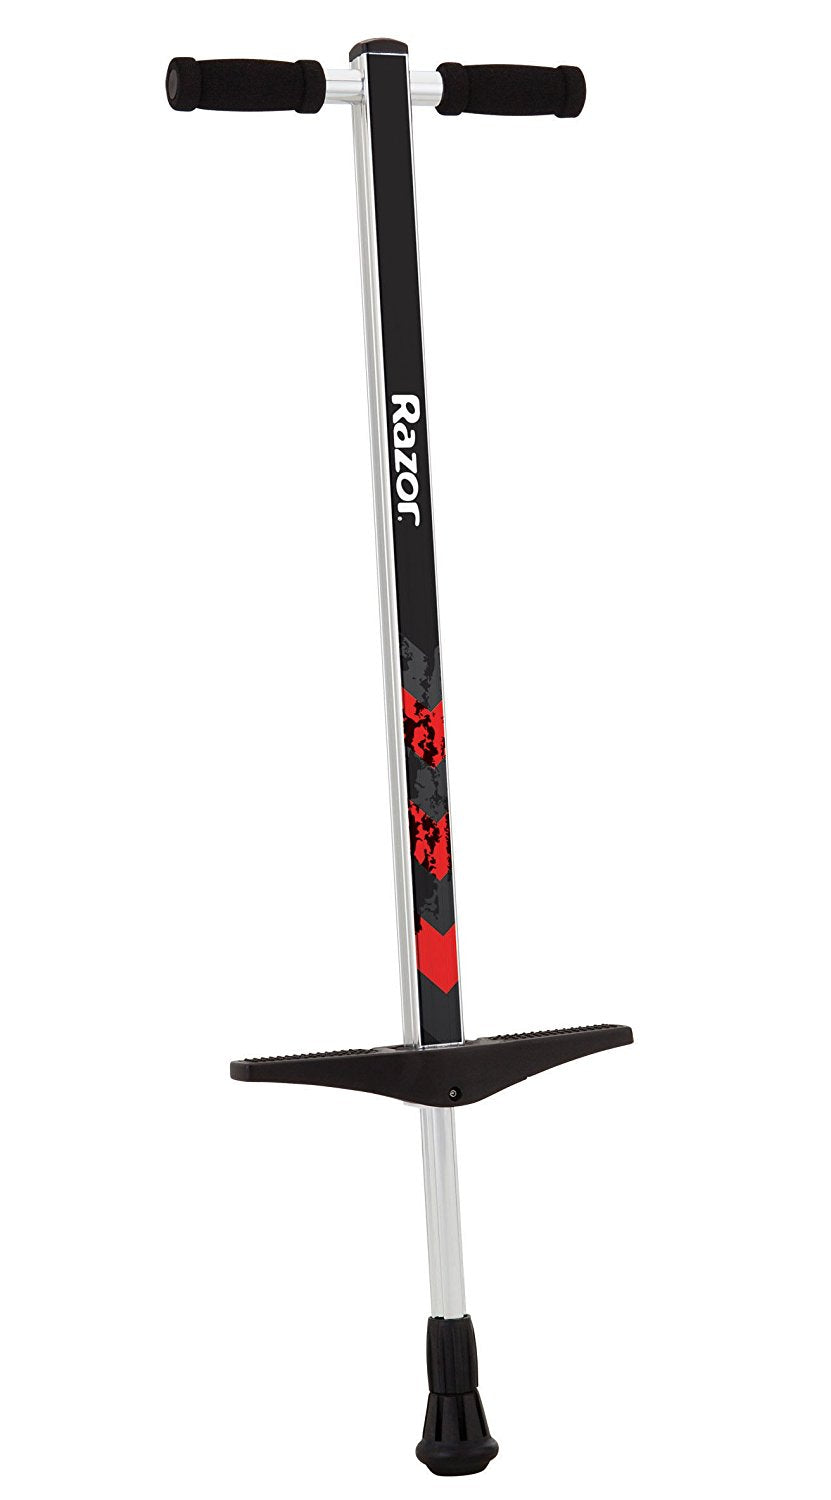 Razor Gogo Pogo Stick, Black - Ages 6 and up, Up to 140lbs (12" x 6" x 43.5")